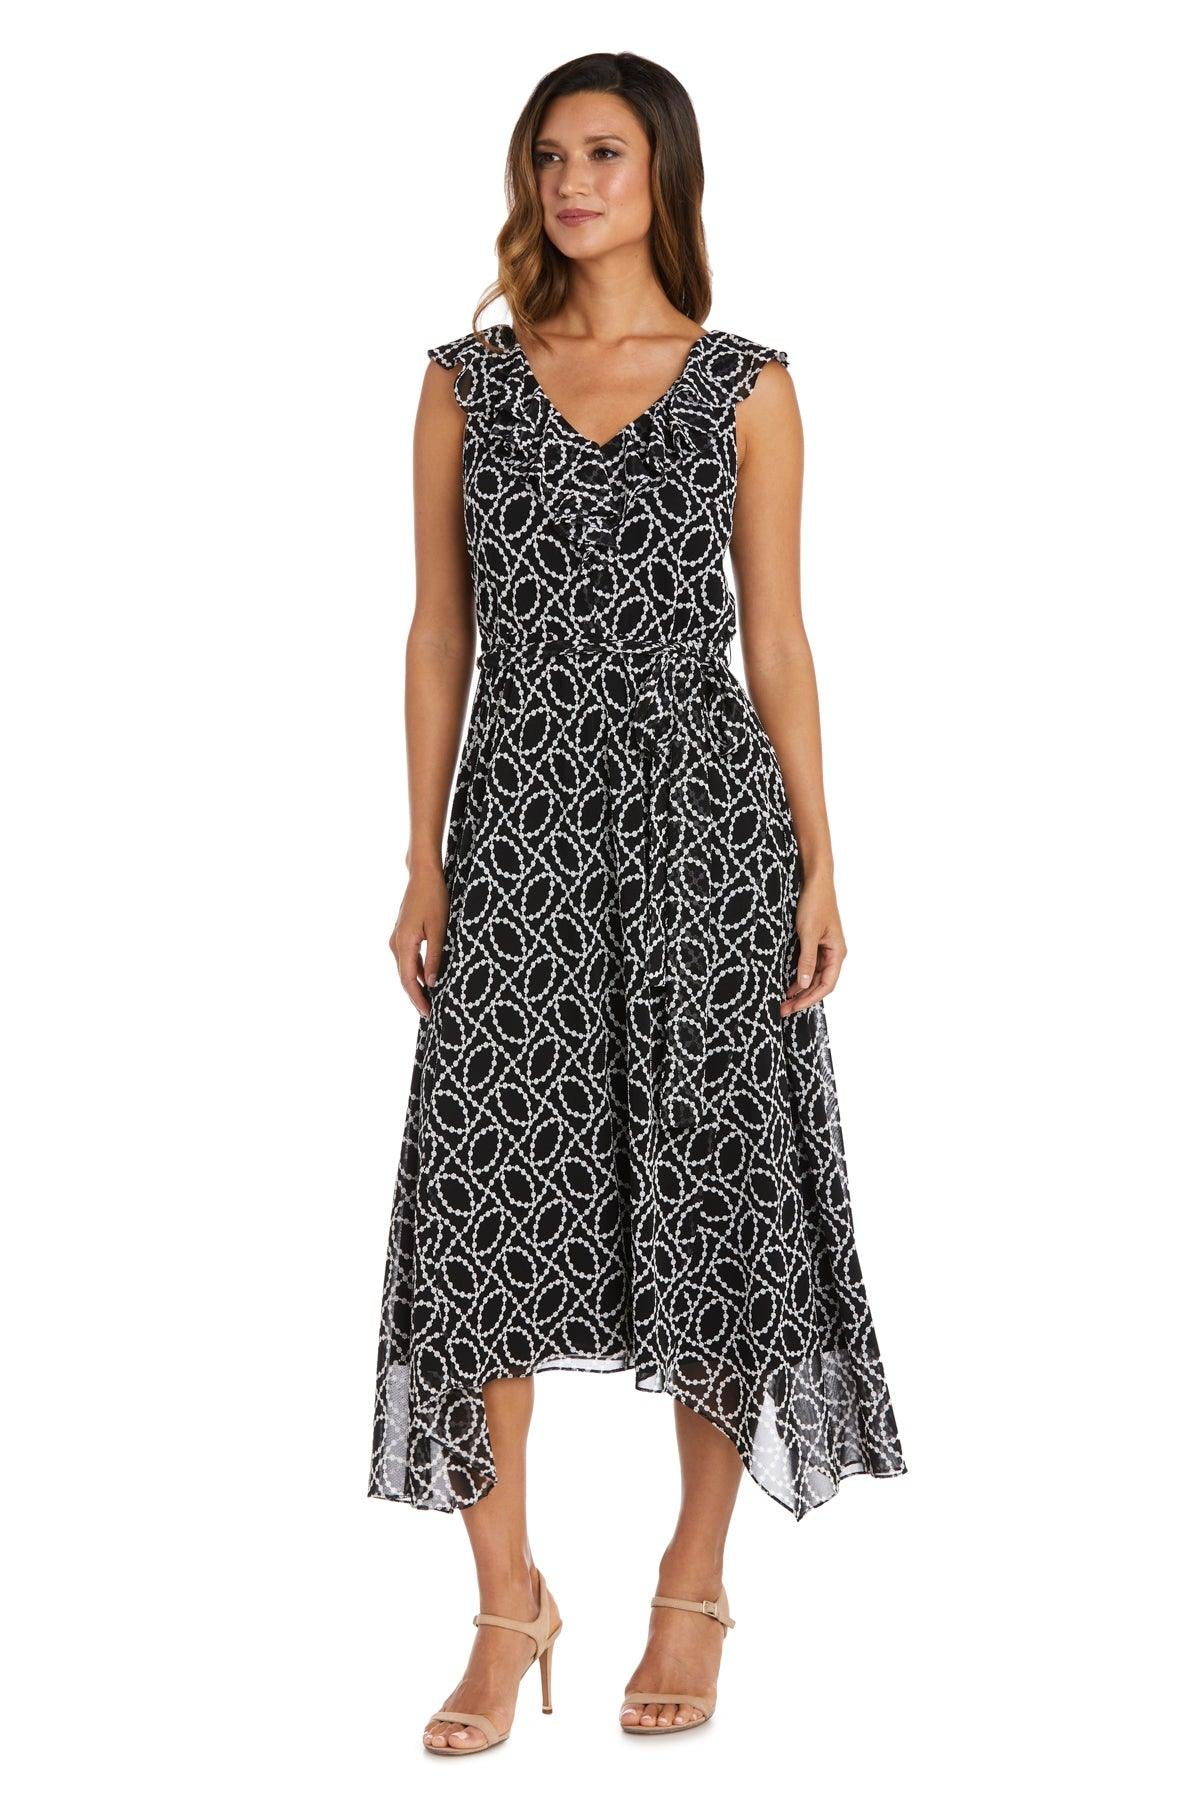 R&M Richards High Low Sleeveless Petite Dress 9364P - The Dress Outlet